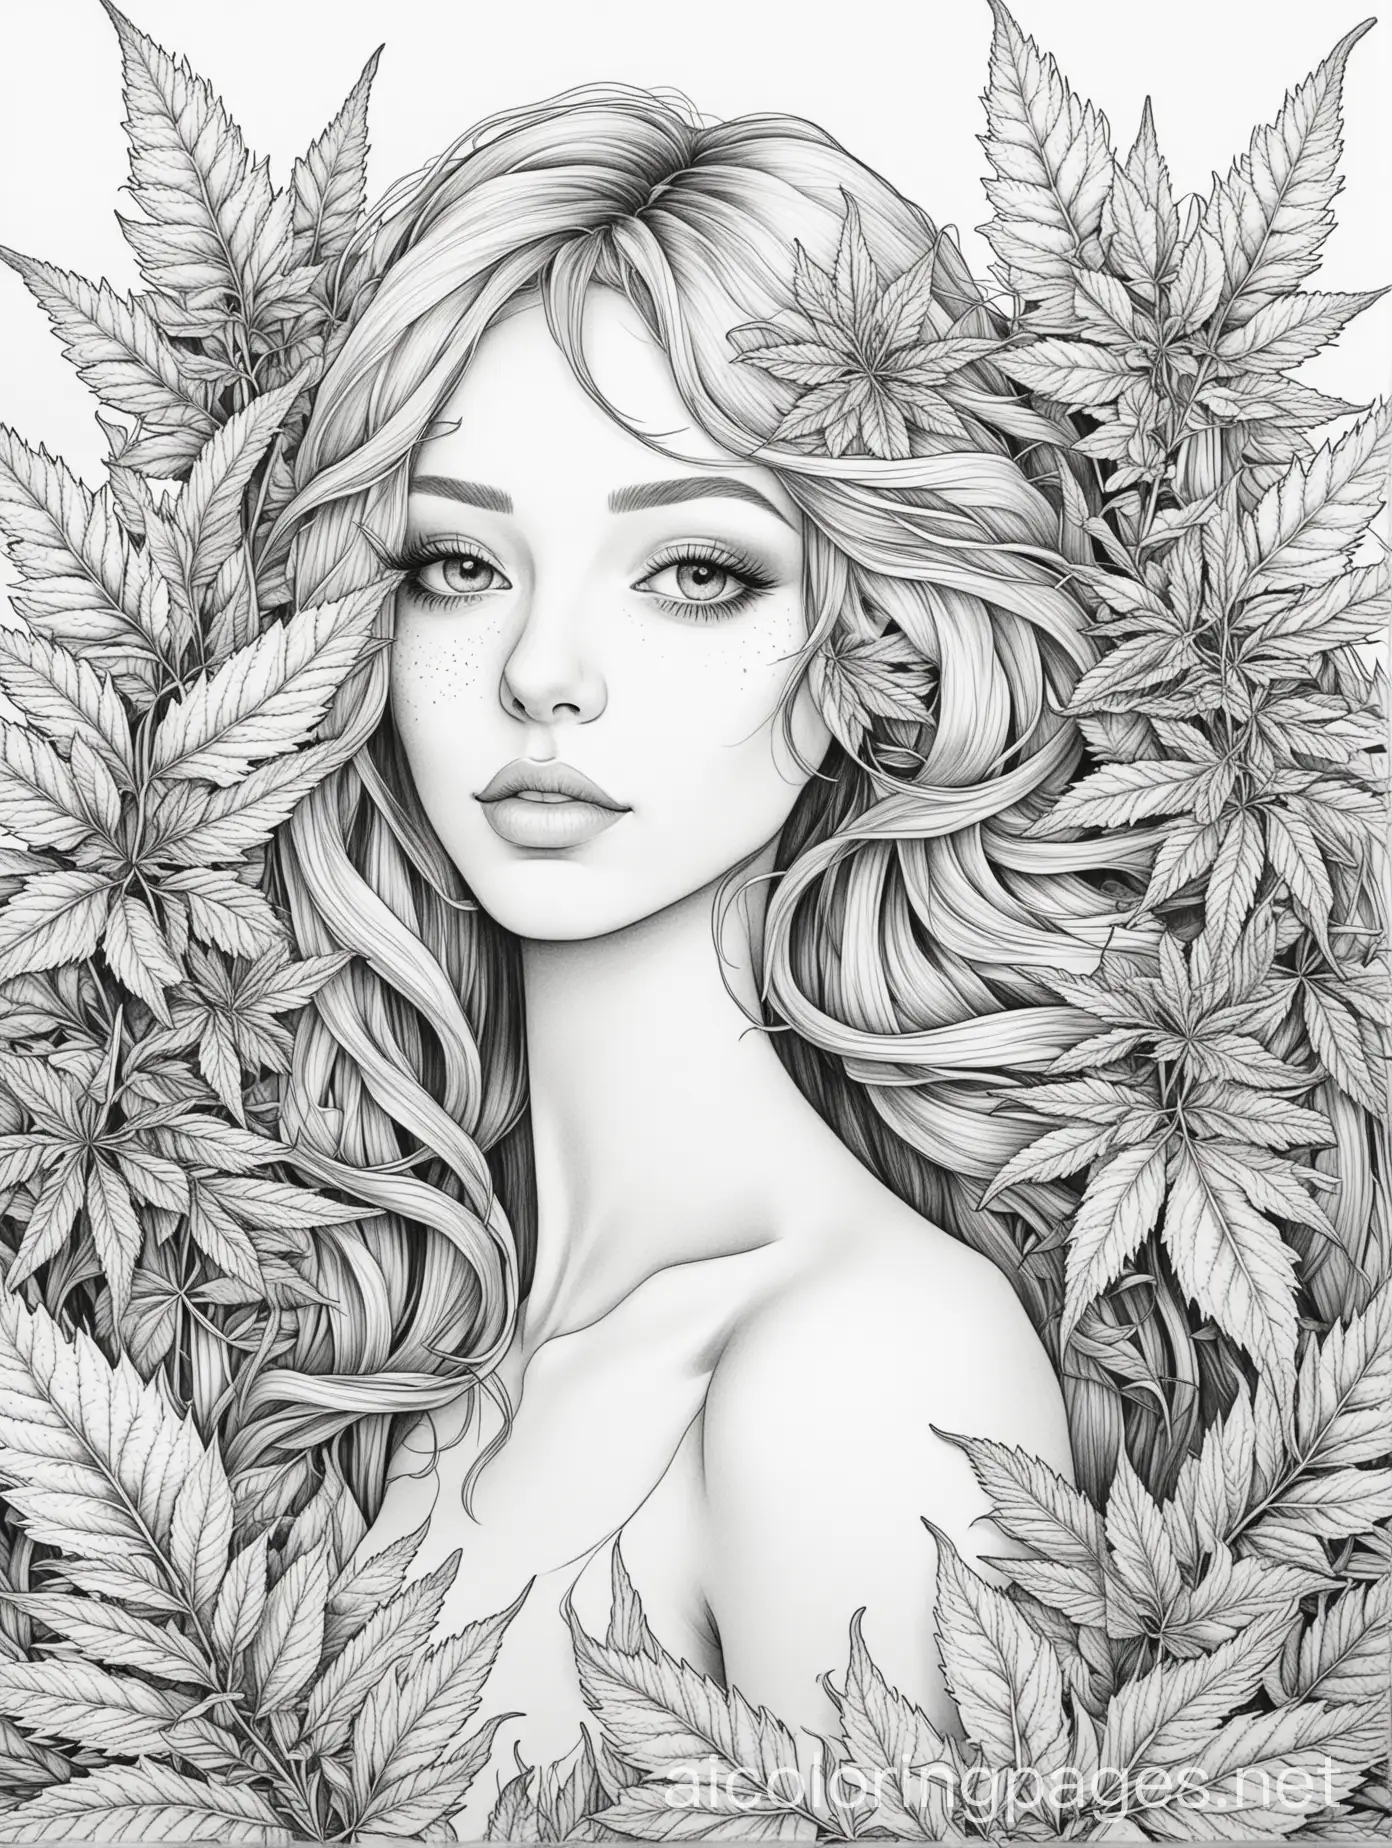 A female surroundee by beautiful flowrrs and cannabis leaves coloring page, Coloring Page, black and white, line art, white background, Simplicity, Ample White Space. The background of the coloring page is plain white to make it easy for young children to color within the lines. The outlines of all the subjects are easy to distinguish, making it simple for kids to color without too much difficulty